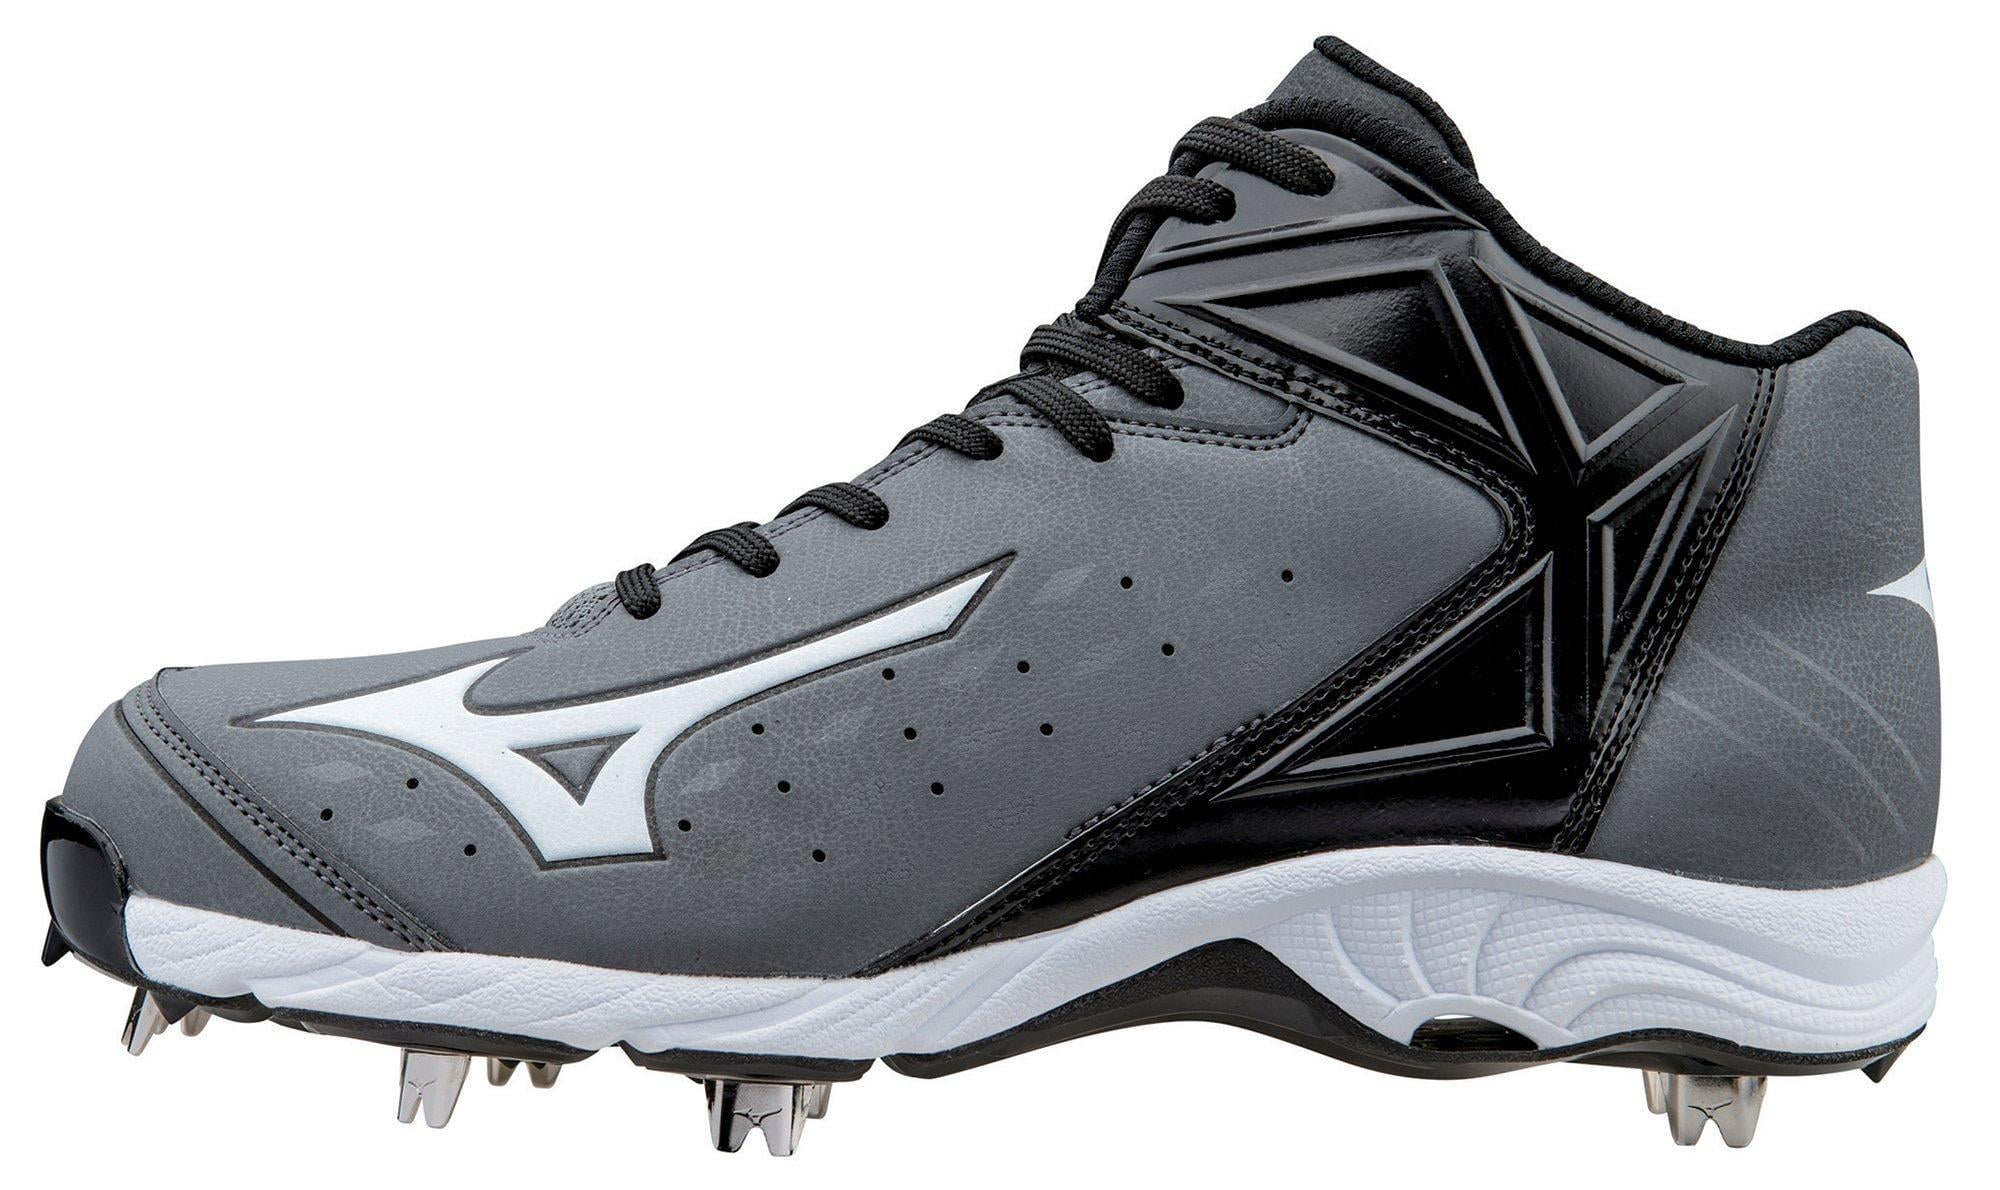 NEW MIZUNO 9-SPIKE ADV. SWAGGER 2 MID BASEBALL CLEATS MENS 12 M SPIKES SHOES